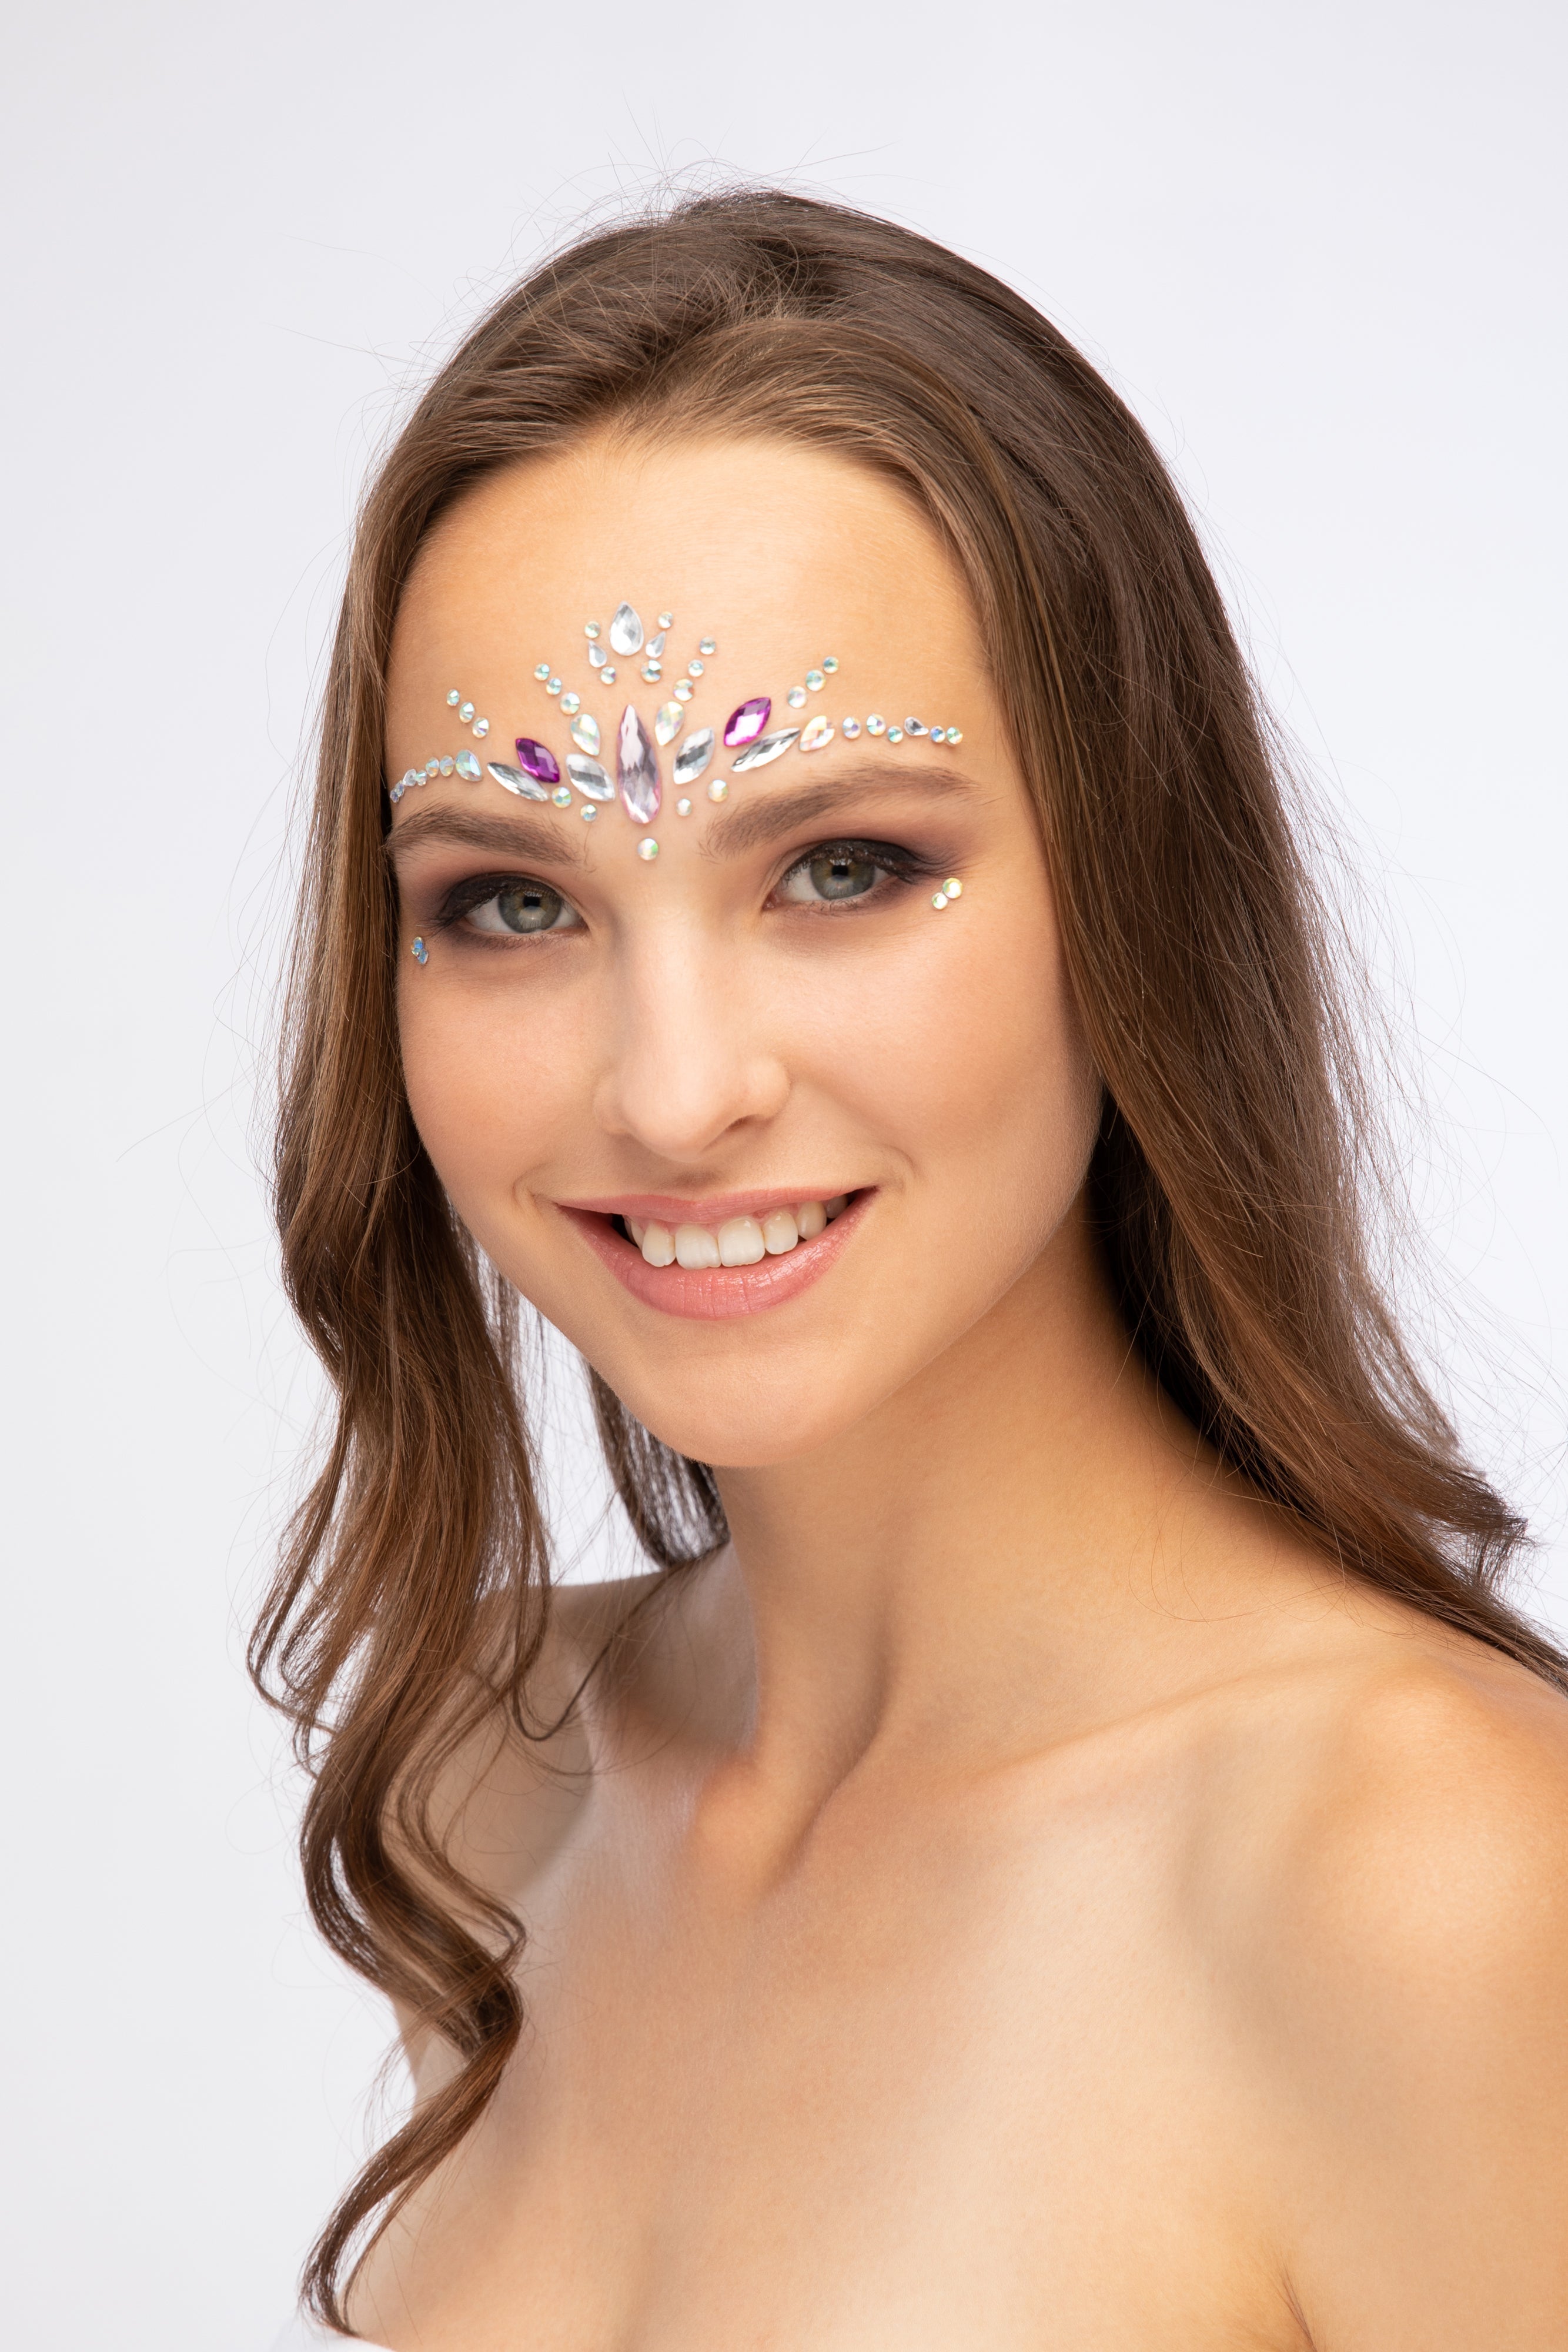 Party Princess - Glitter Adhesive Face Gems, Jewels and Rhinestones